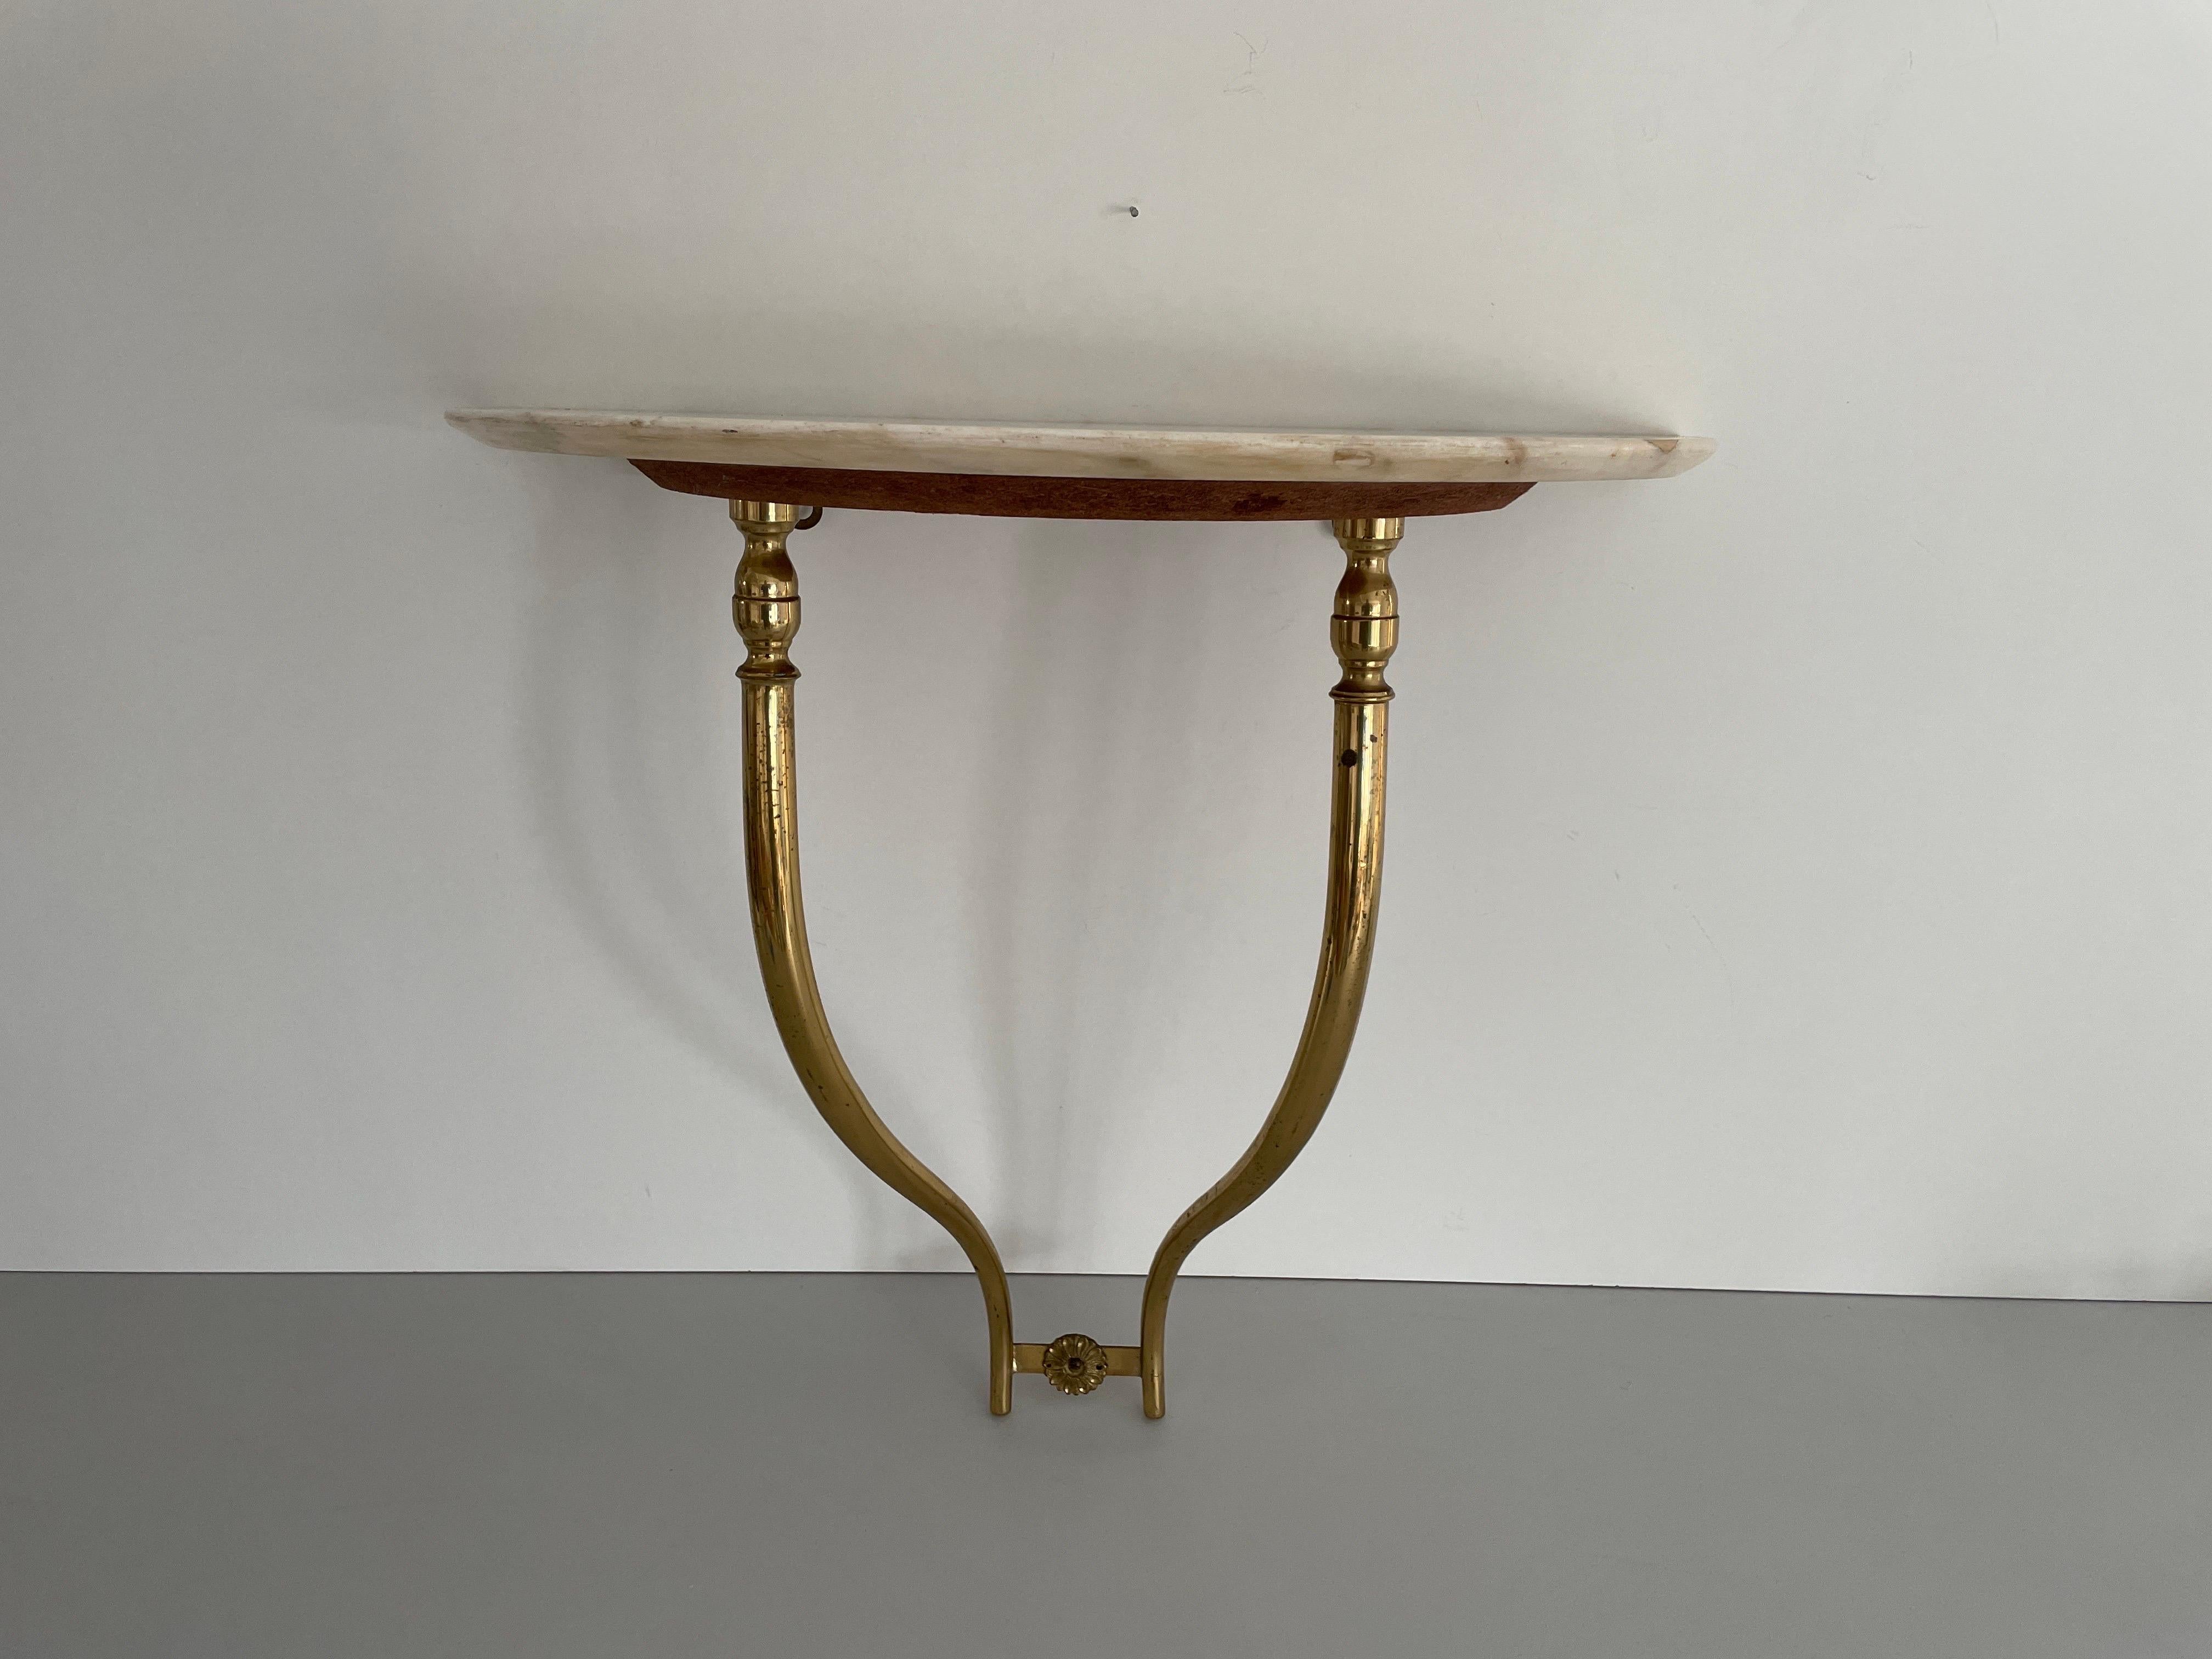 Mid-Century Brass and Marble Top Floating Wall Console Table, 1950s, Italy

No damage, no crack.
Wear consistent with age and use.

Measurements: 
Height: 48 cm
Width: 50 cm
Depth: 24 cm